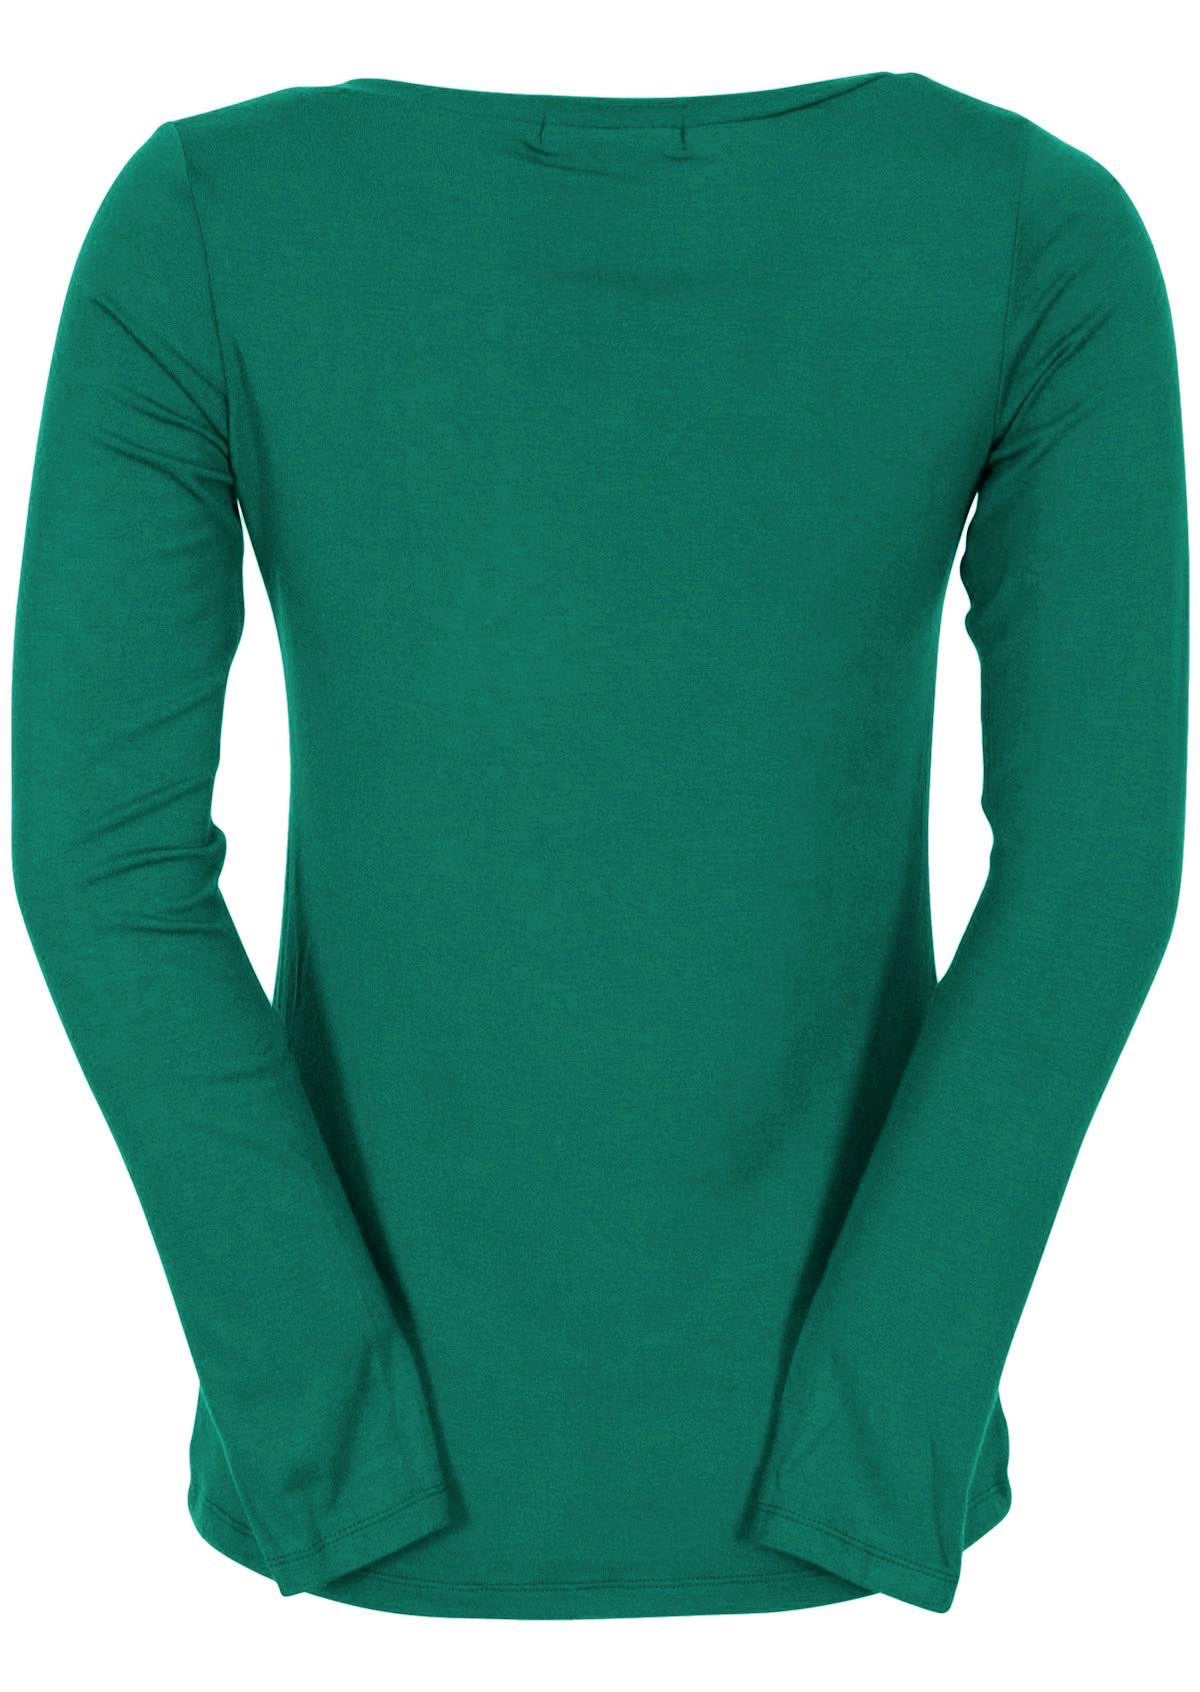 Back view of women's jade green long sleeve stretch v-neck soft rayon top.